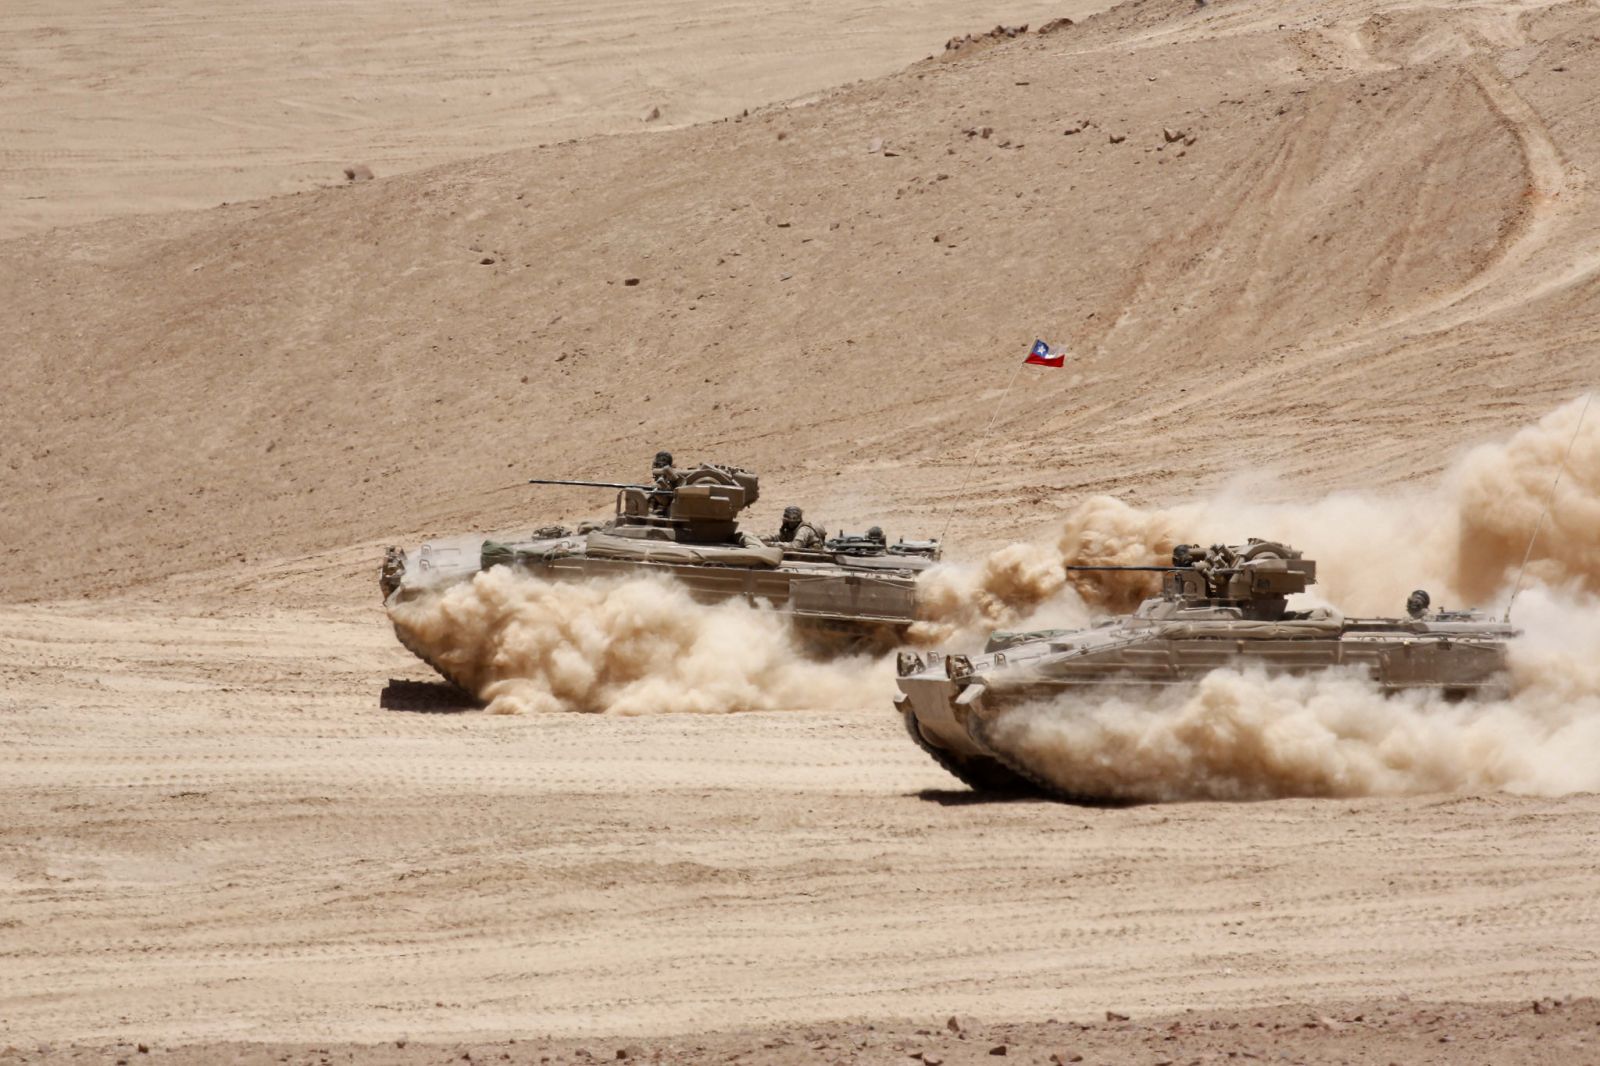 Chilean Army Marder Infantry Fightings Vehicles and Leopard 2 Main Battle Tanks